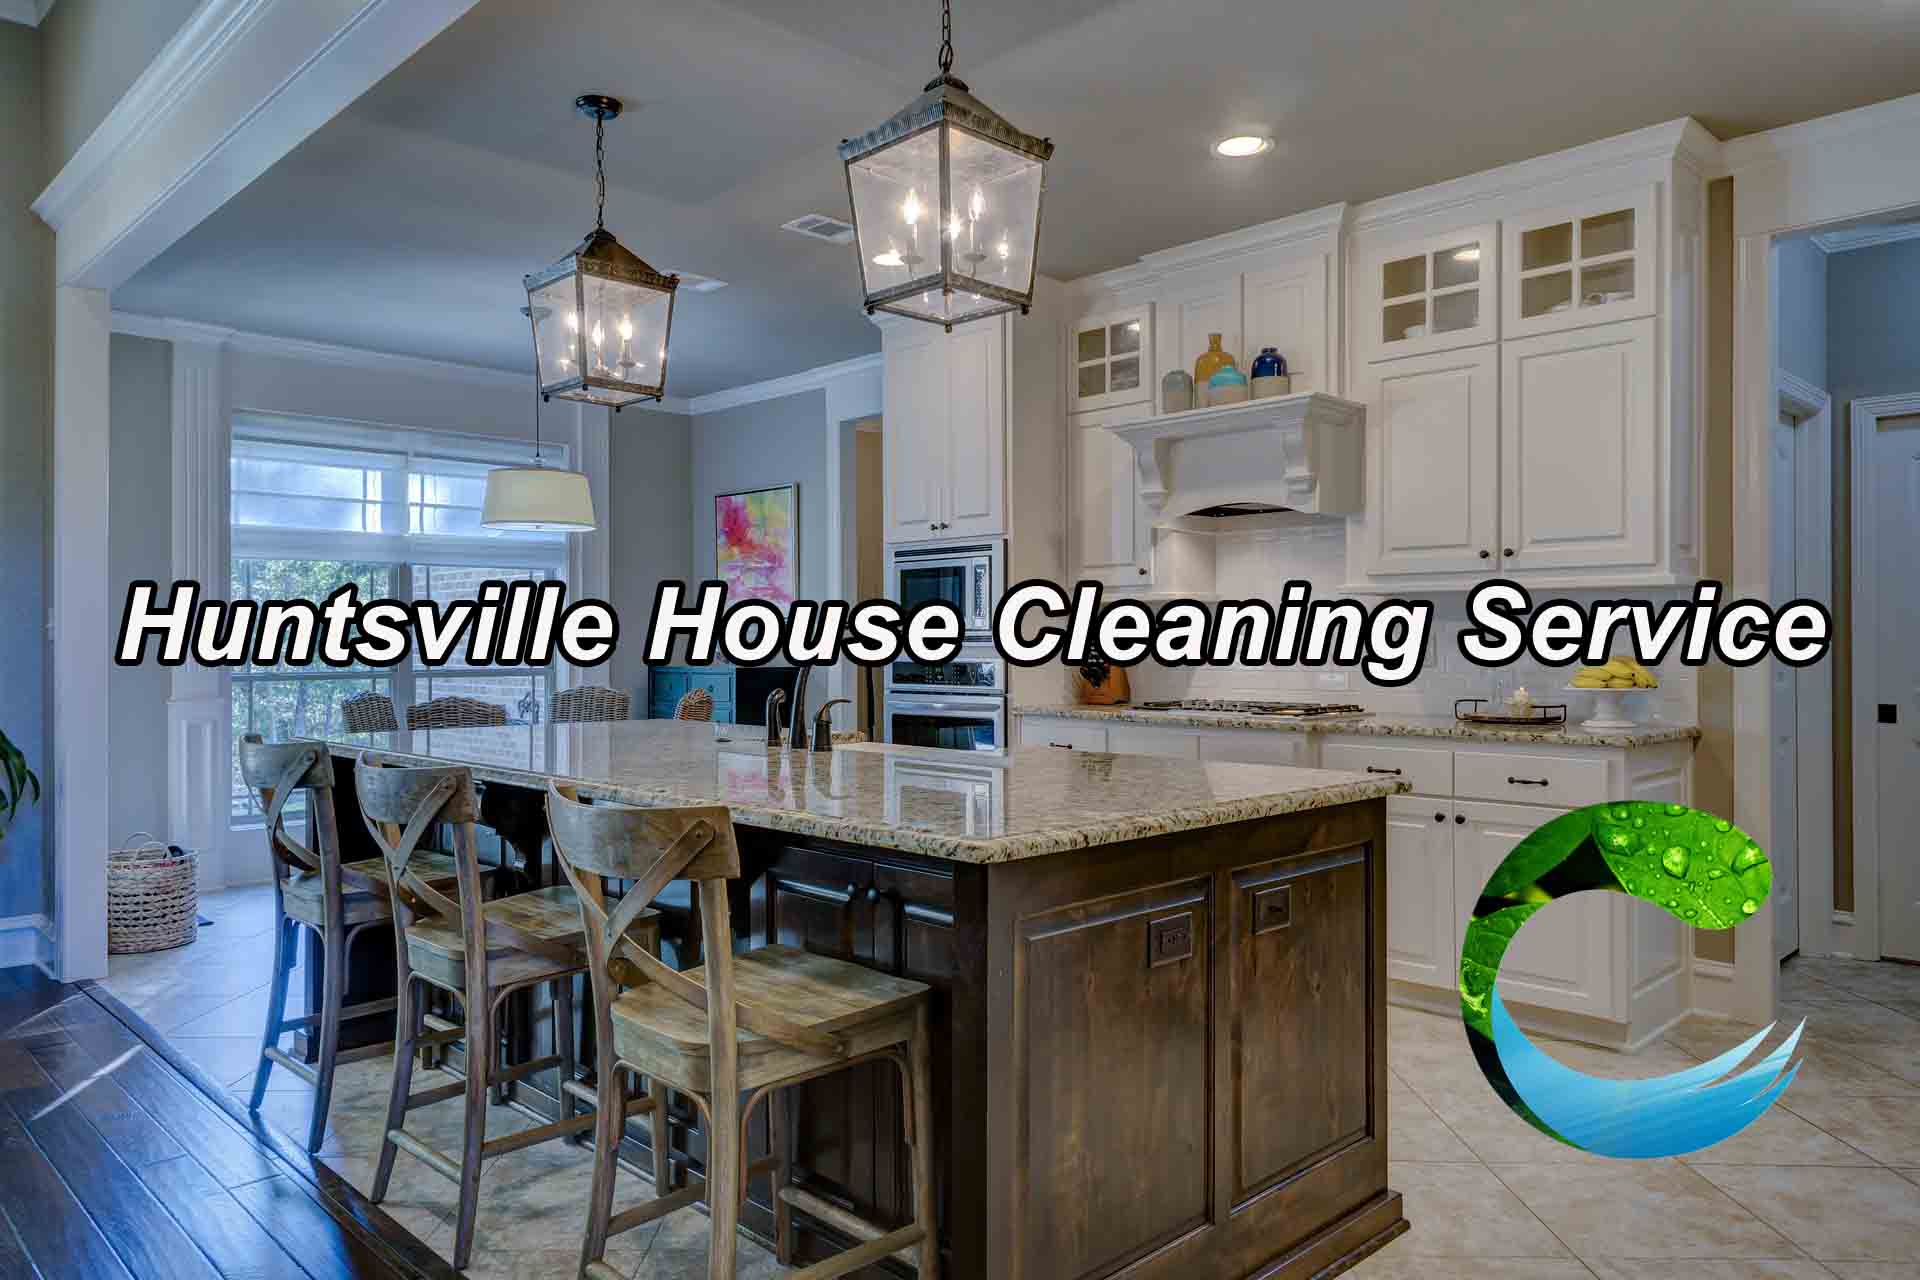 Huntsville House Cleaning Service